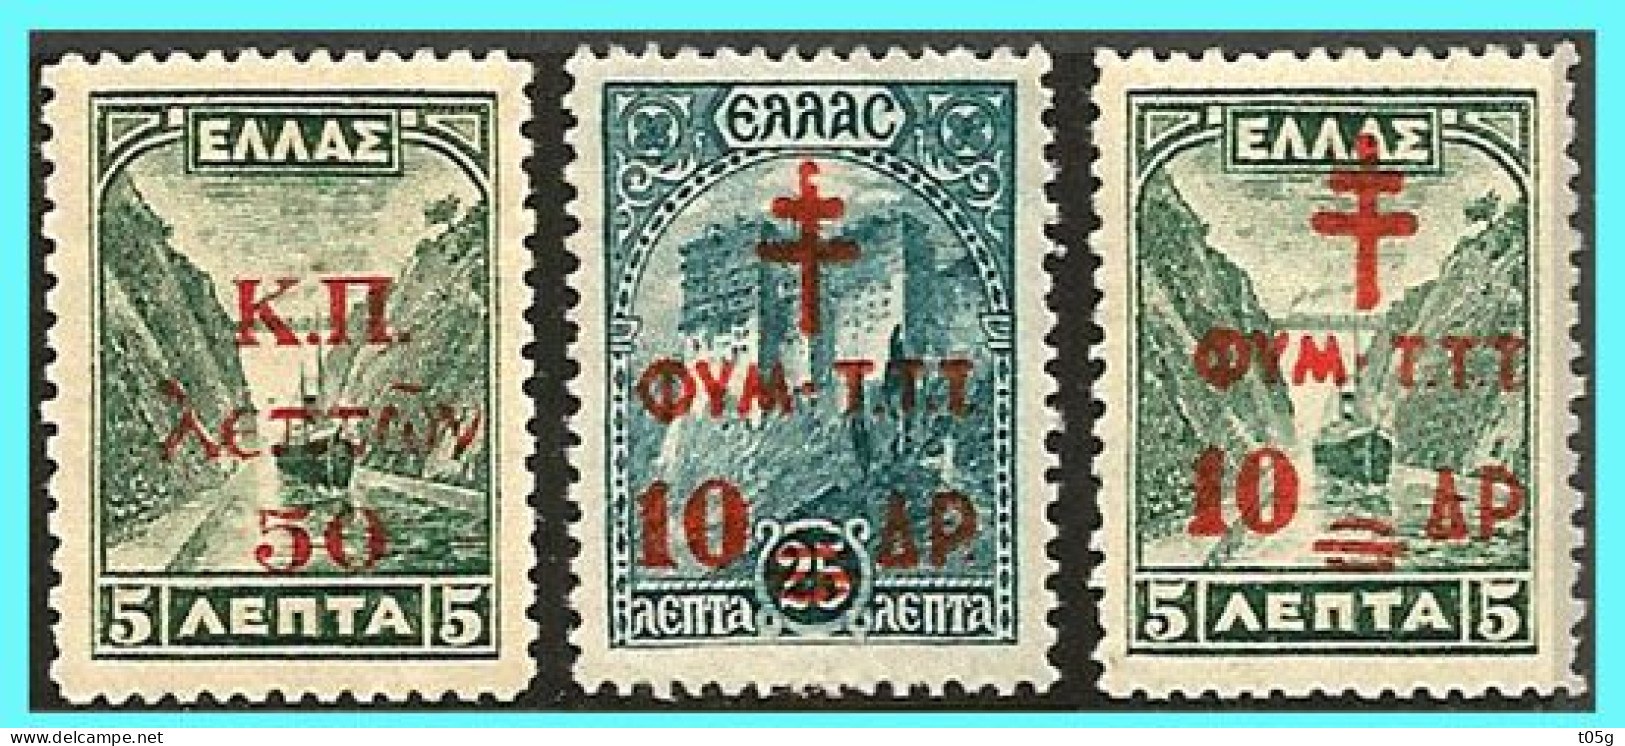 GREECE -GRECE- HELLAS 1941-42-43: Charity Stamps " Landscapes"  Overprind Compl Set MNH** - Charity Issues